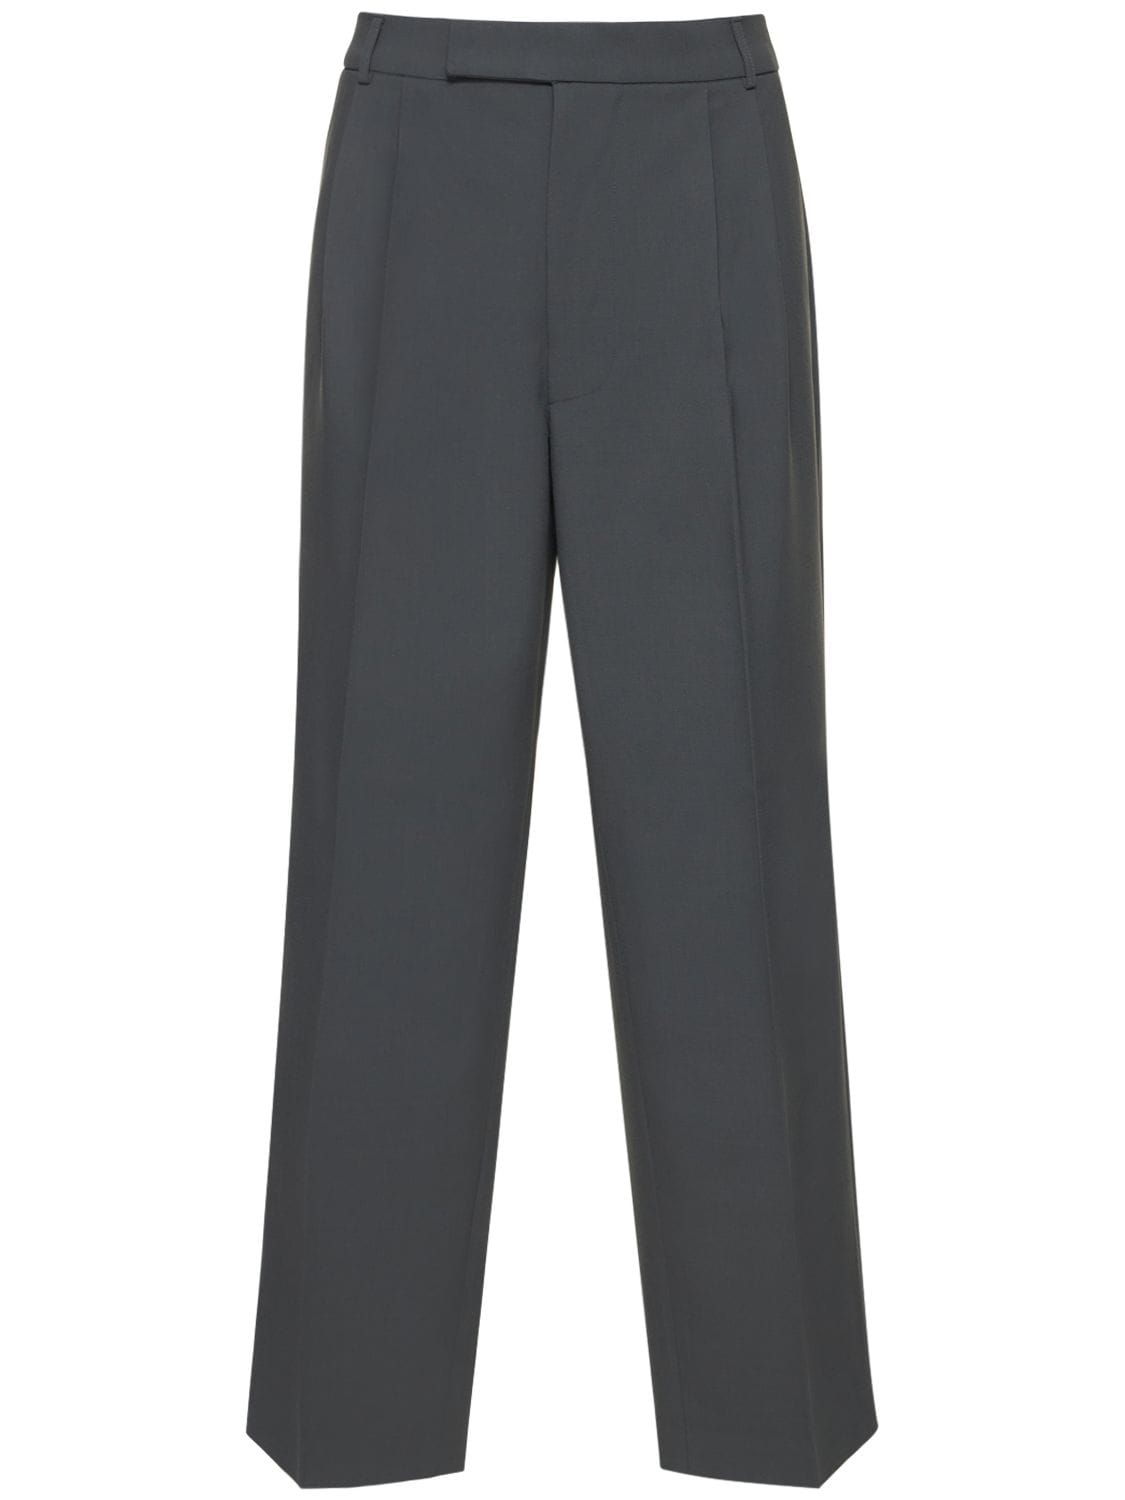 The Frankie Shop Beo Midweight Light Stretch Suit Pants In Charcoal